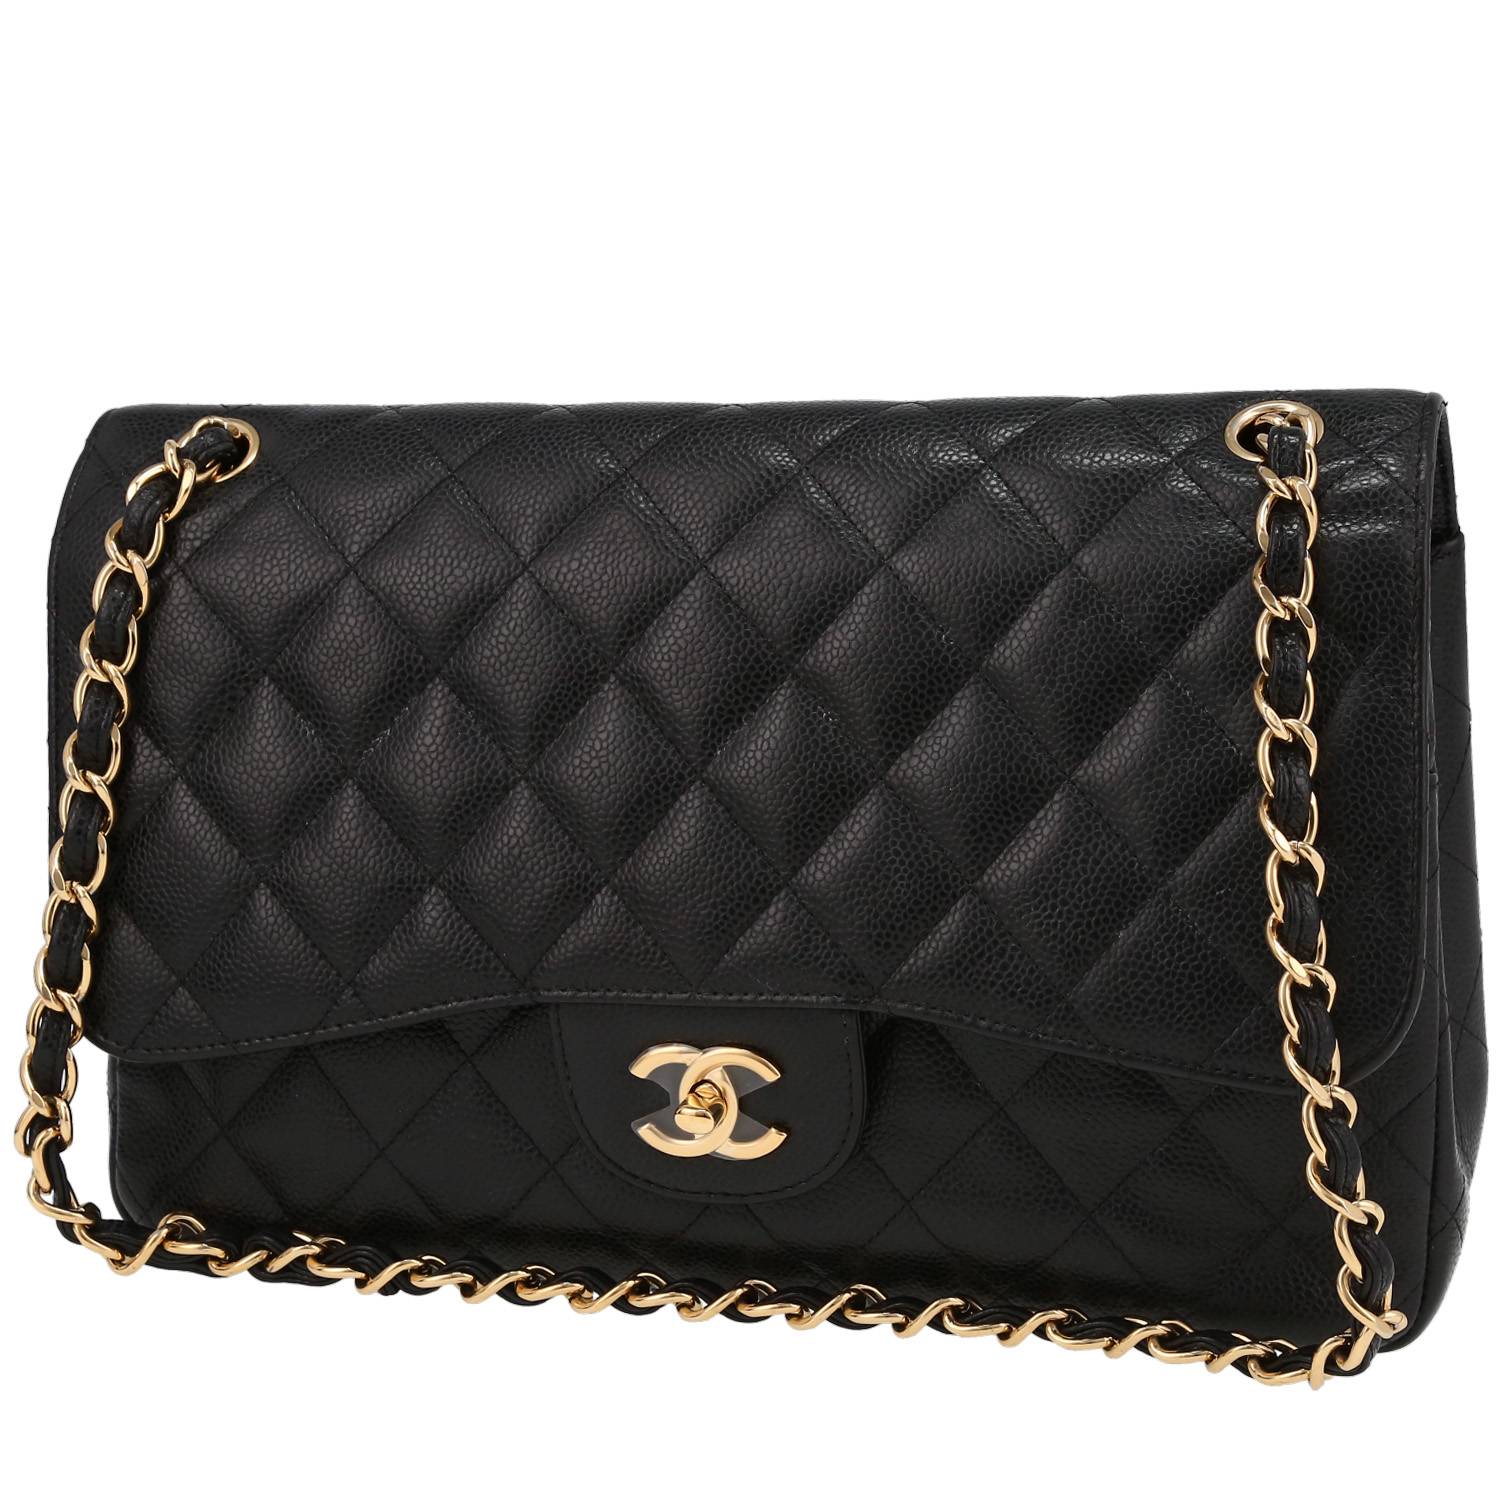 Chanel Timeless Jumbo Shoulder Bag in Black Quilted Grained Leather